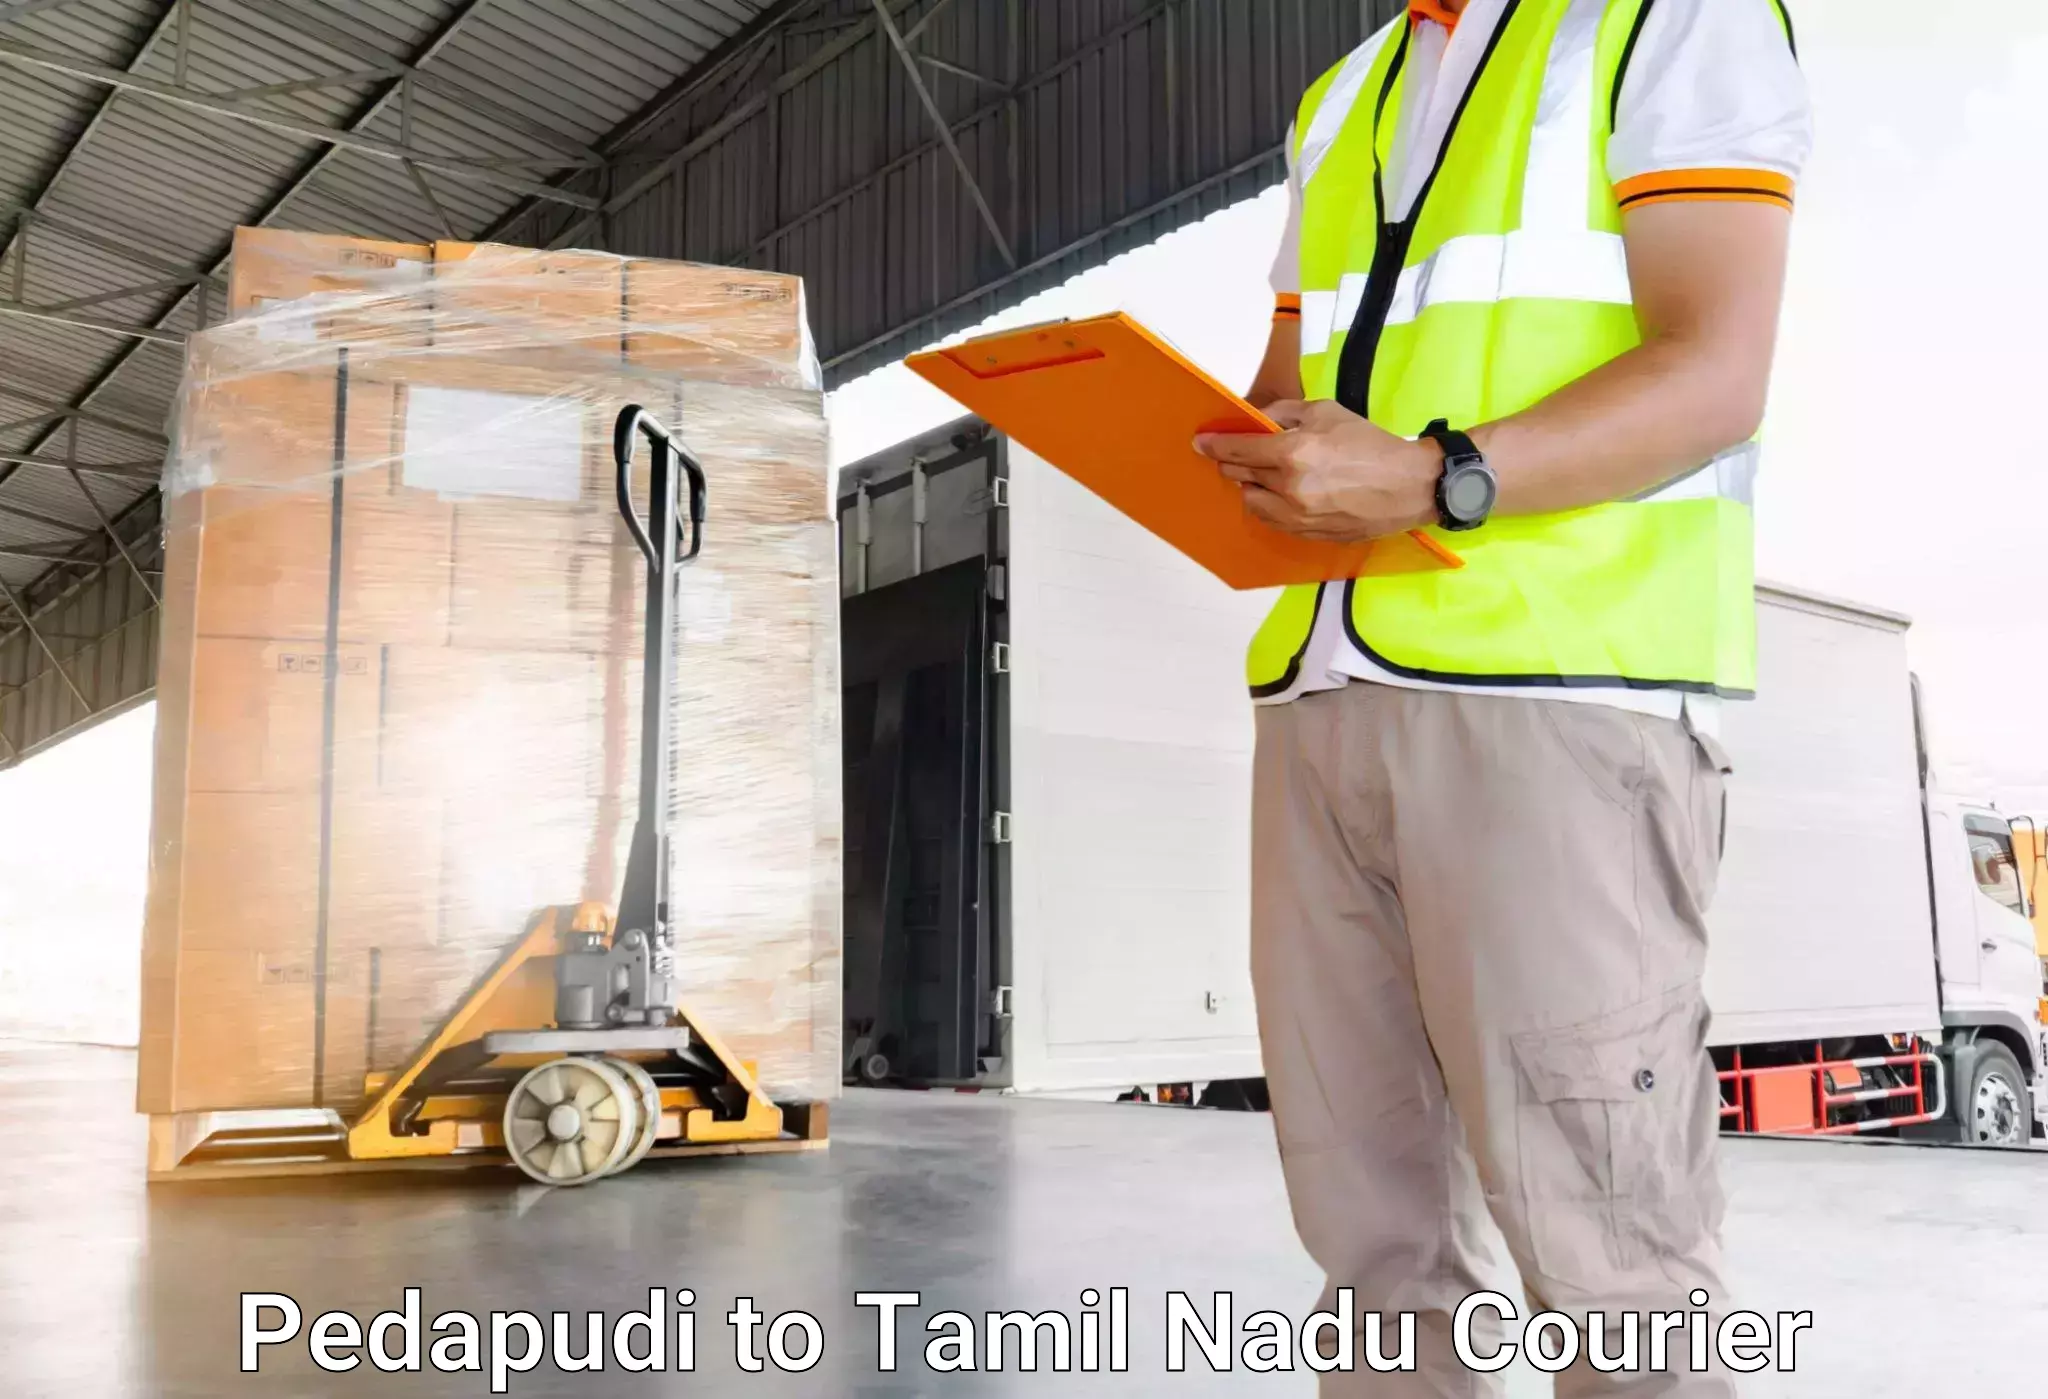 Automated luggage transport Pedapudi to Shanmugha Arts Science Technology and Research Academy Thanjavur